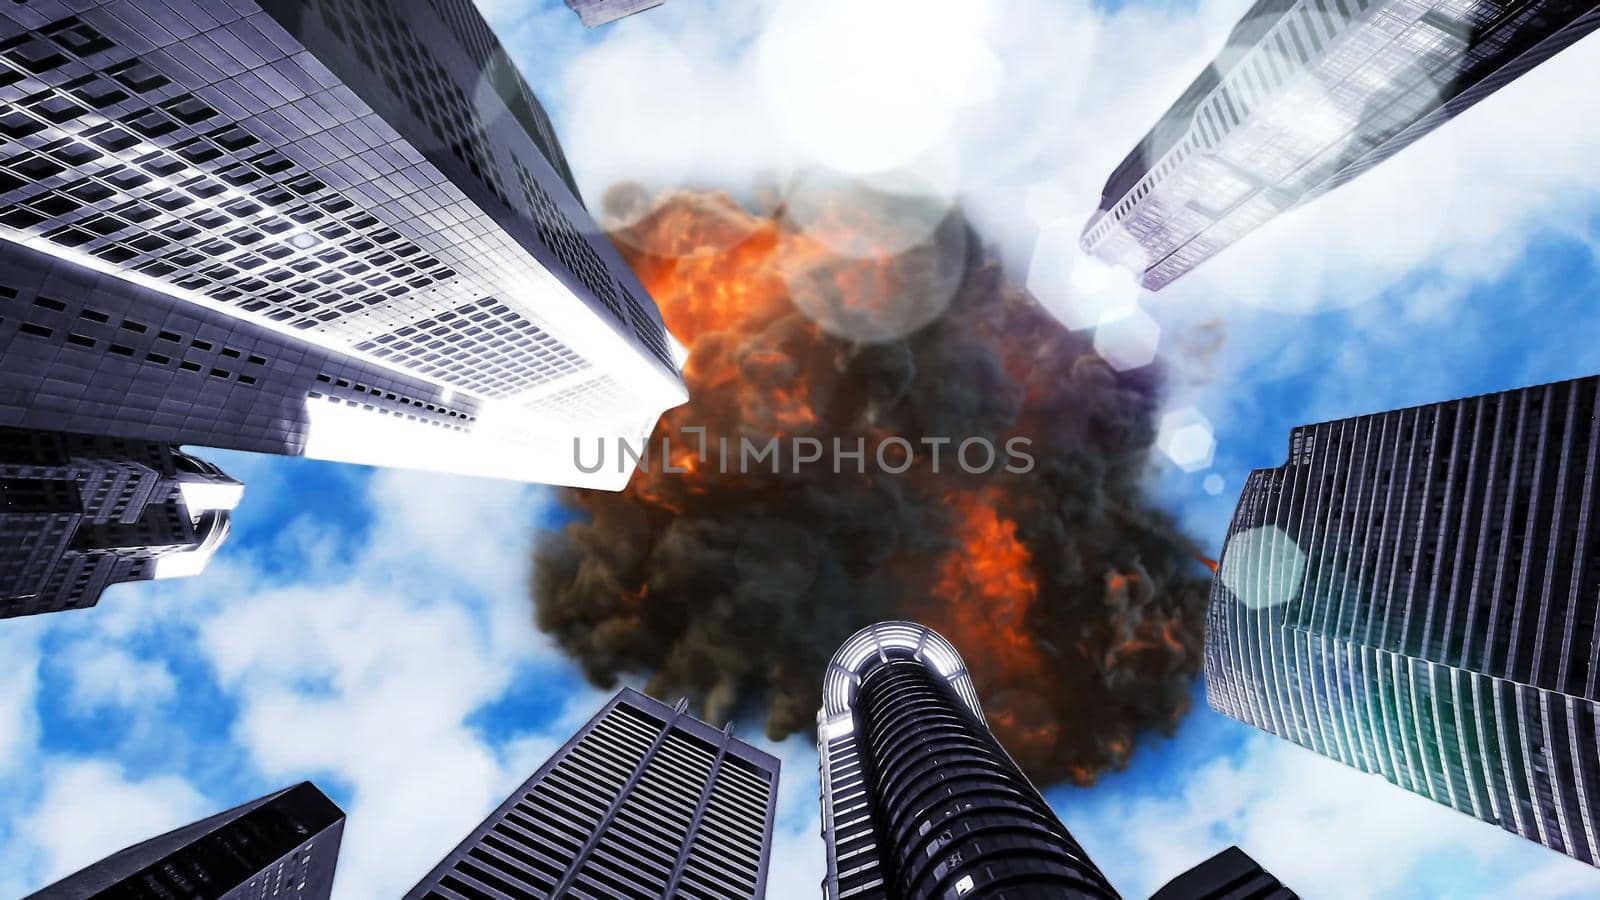 UFO explodes in the sky over skyscrapers 3D rendering by designprojects